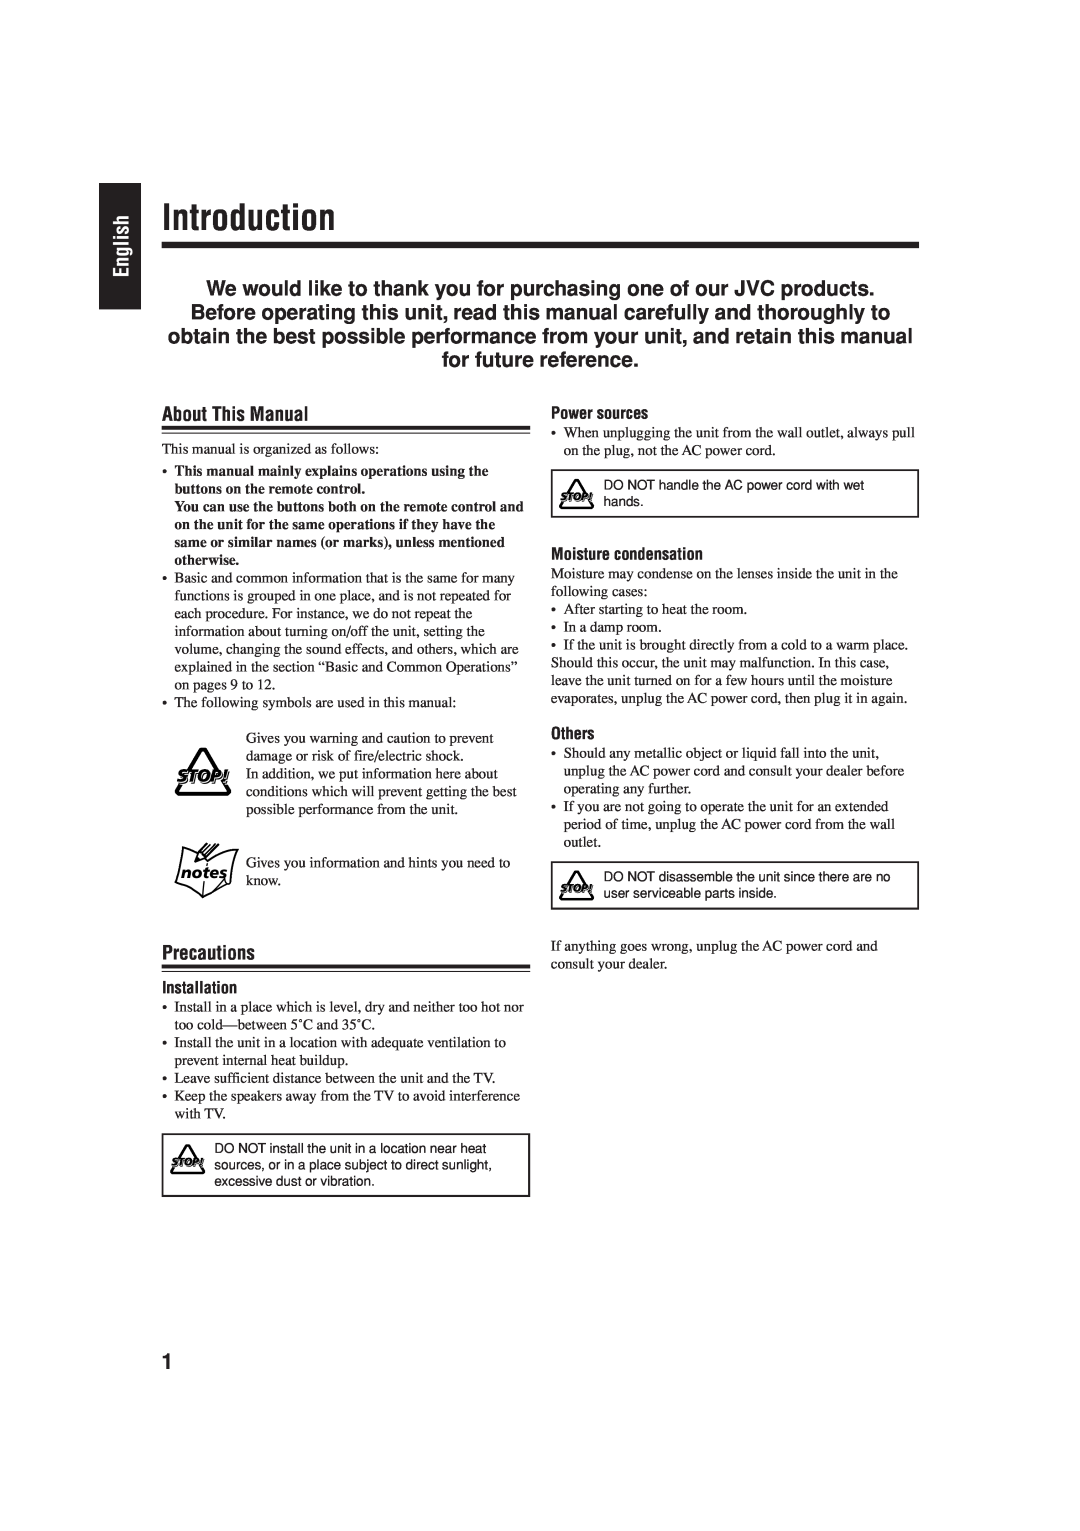 JVC GVT0134-001B English, Introduction, About This Manual, Precautions, Installation, Power sources, Moisture condensation 